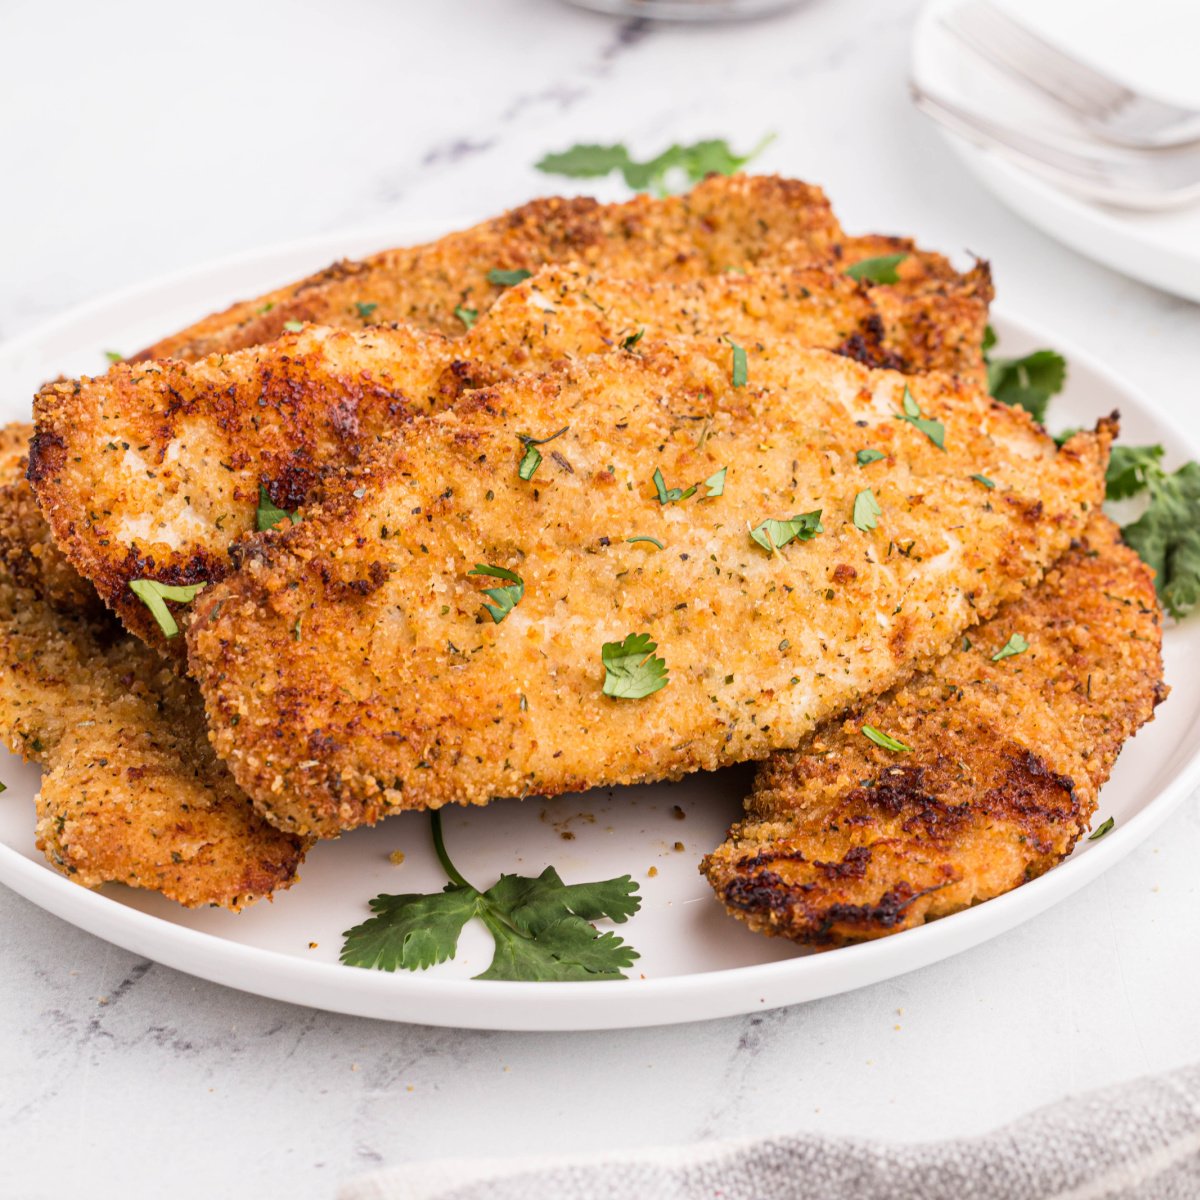 Fully cooked in the air fryer, chicken cutlets served on a white plate with parsley.